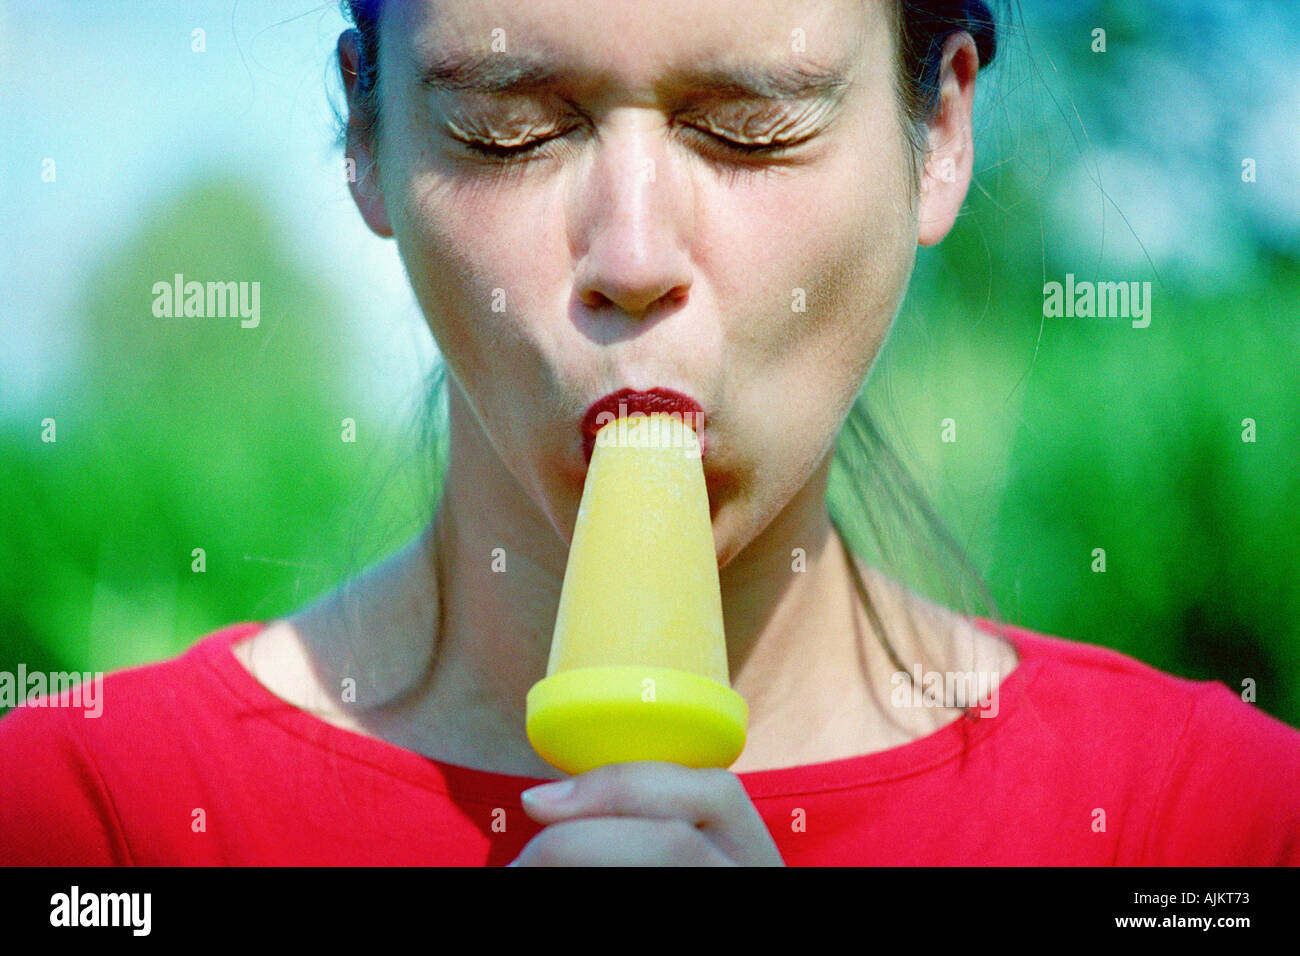 Woman eating an ice lolly Stock Photo